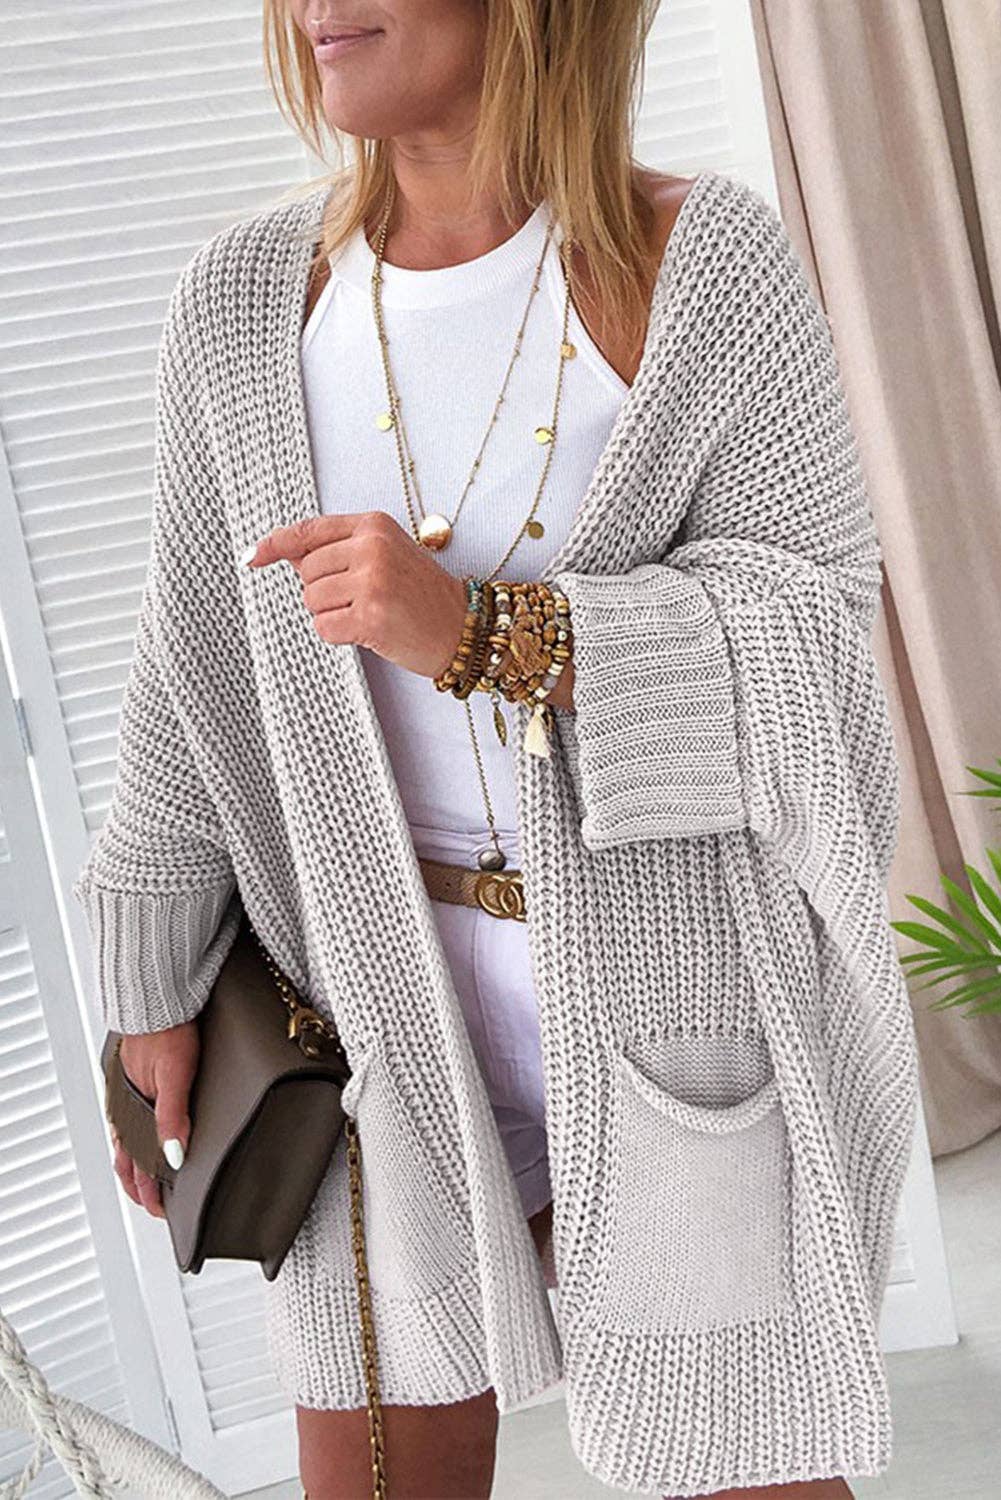 Oversized Fit Sweater